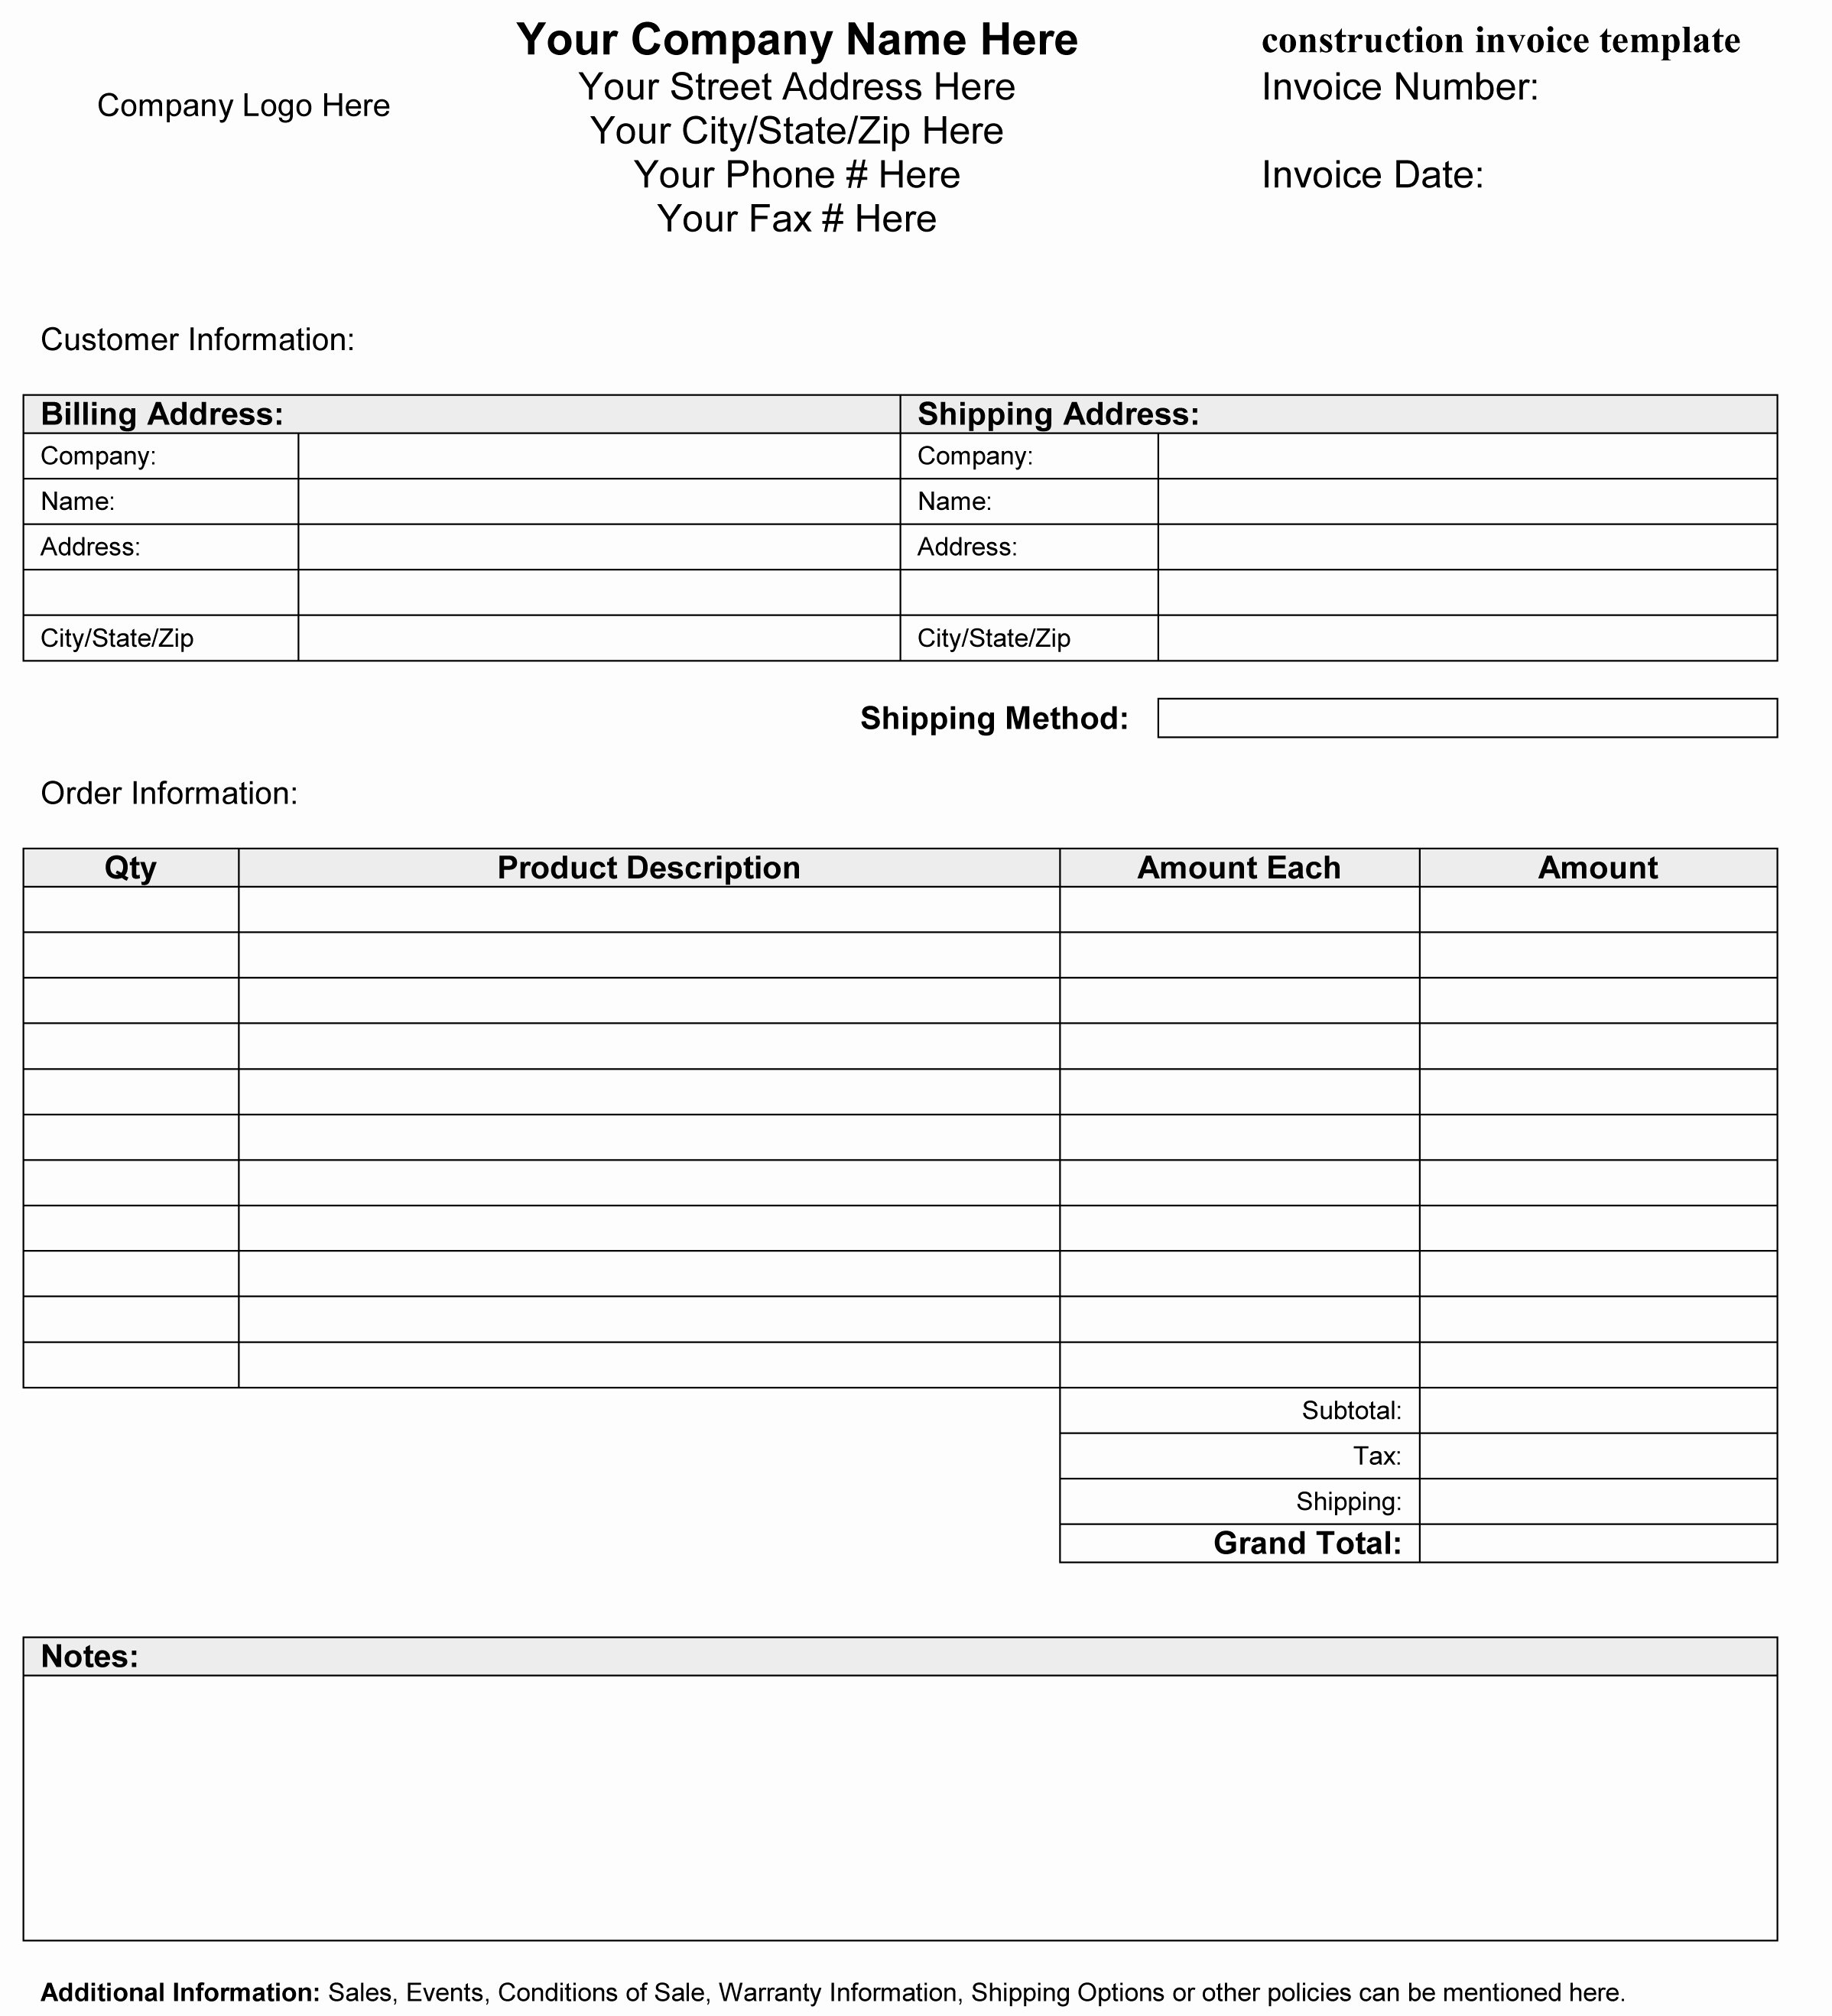 Contractor Invoice Template Word Beautiful Construction Invoice Template